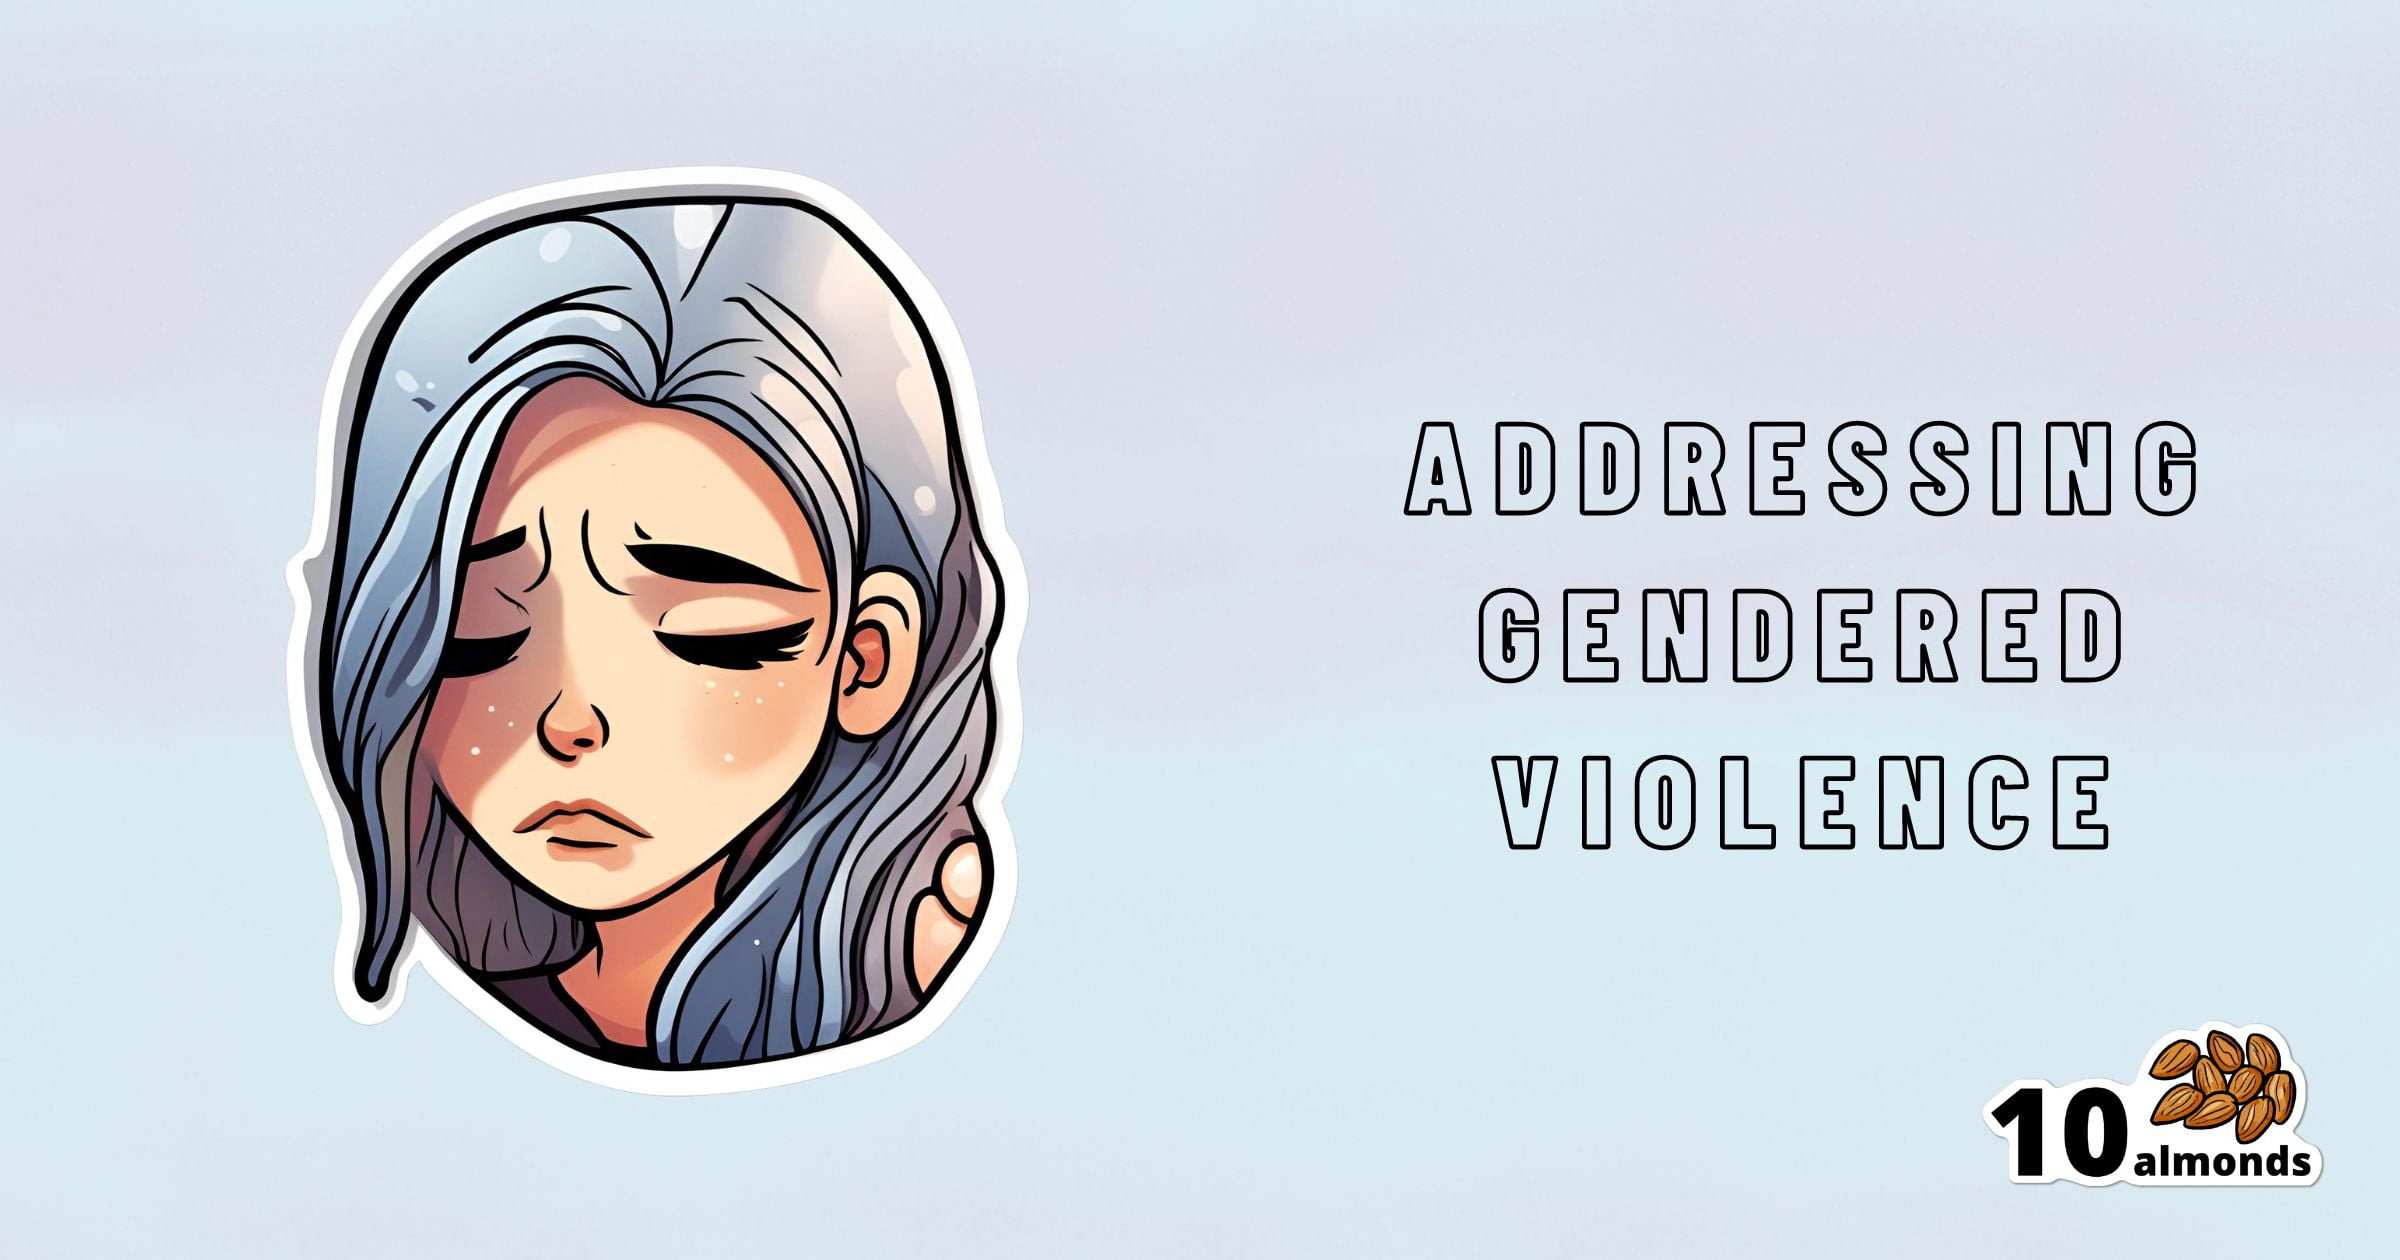 An illustration of a person with long, wavy gray hair and a sad expression, eyes closed, accompanied by the text "Addressing Gendered Violence"—reflecting the deep trauma and mental health impact—and the logo "10 almonds" featuring an image of ten almonds in the bottom right corner.